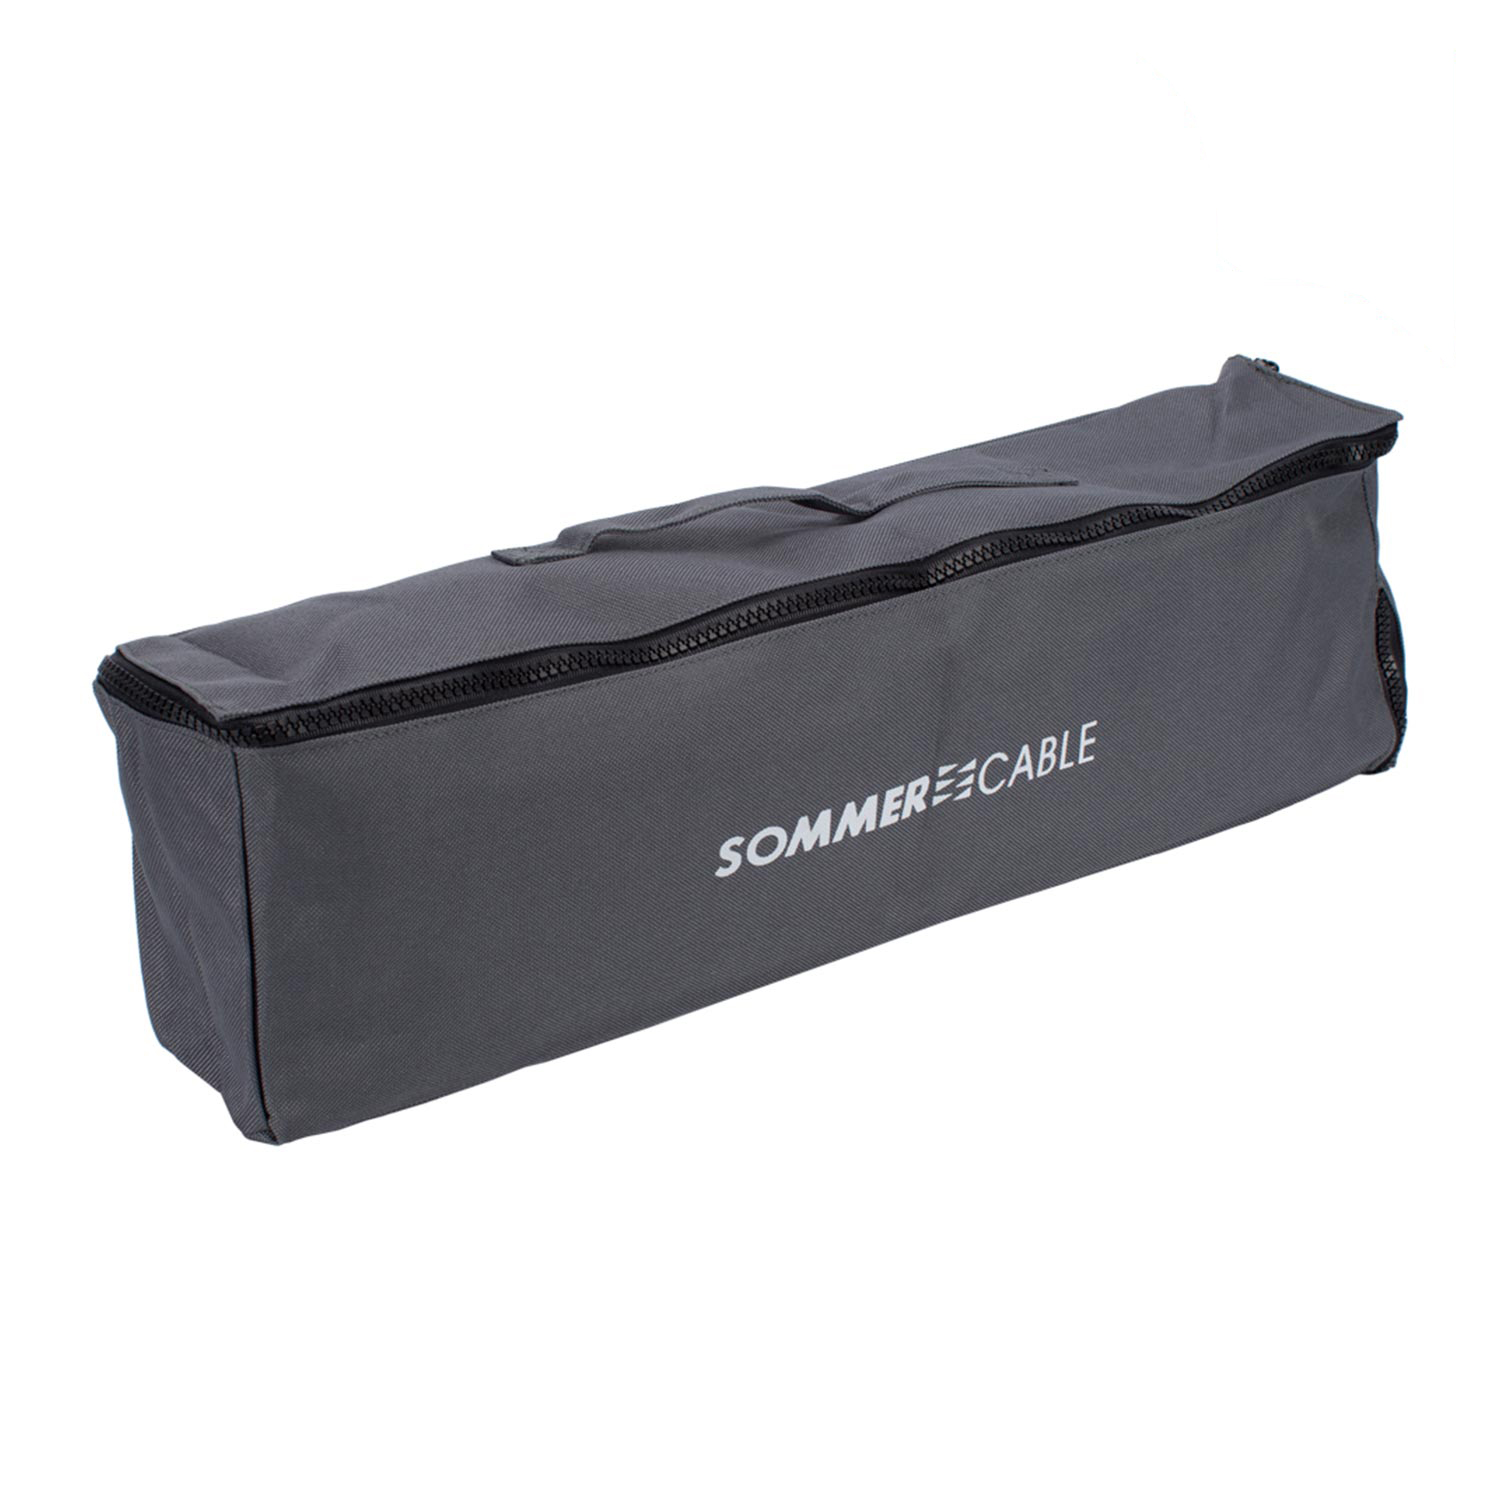 Sommer cable Protective Bag for 19“ Stagebox 2 HU, later assembly, ideal protection for stage sub-distributors + 19“ components or stageboards, grey